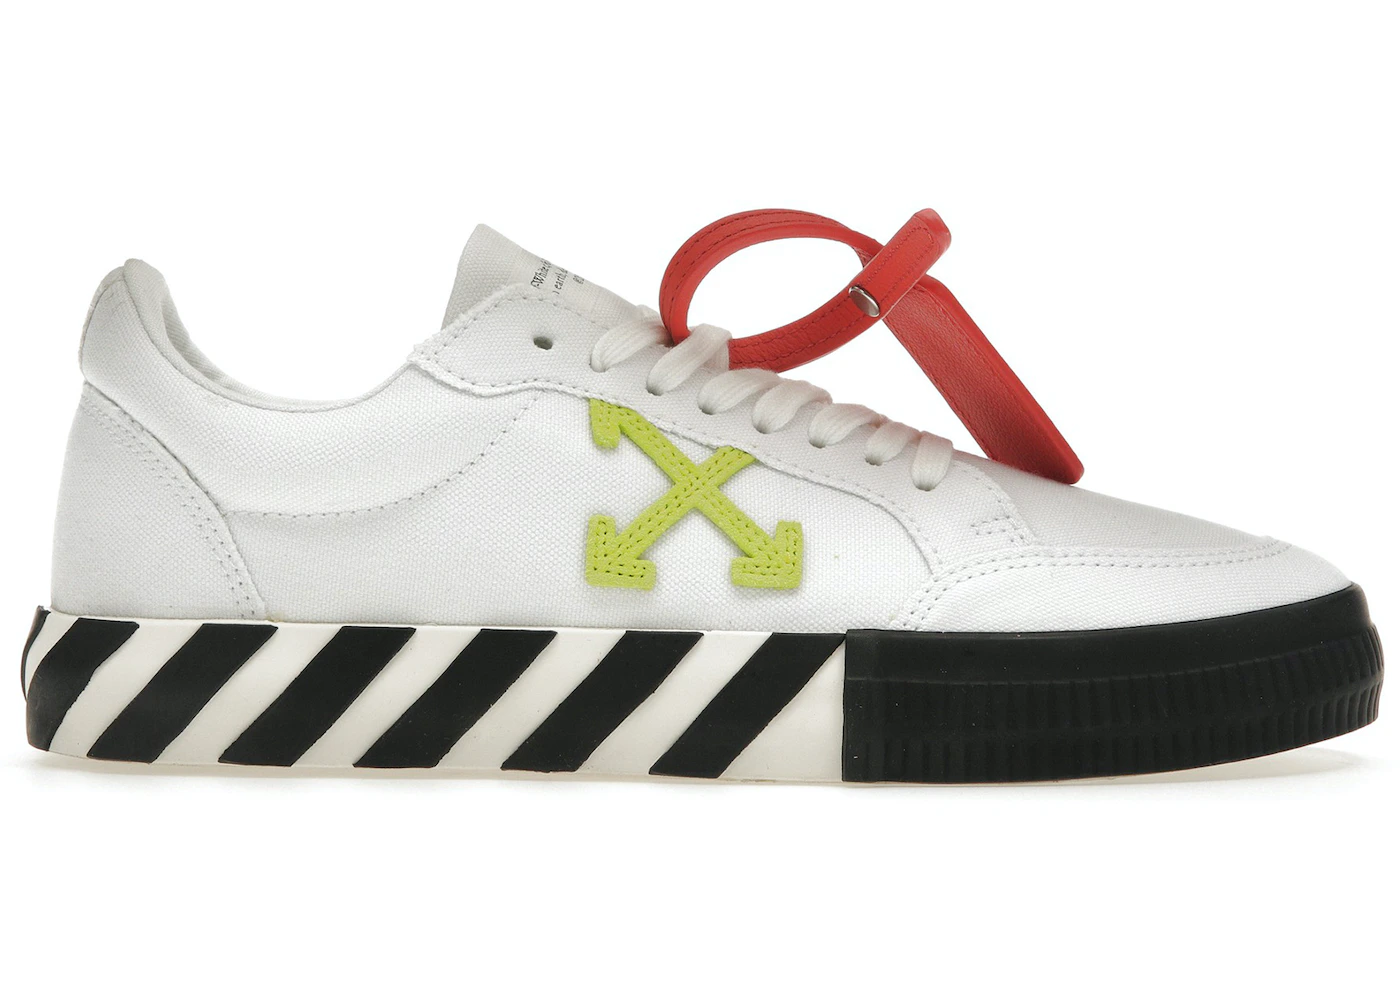 OFF-WHITE Vulc Low Lime Men's - OMIA085S23.FAB001.0150 - US